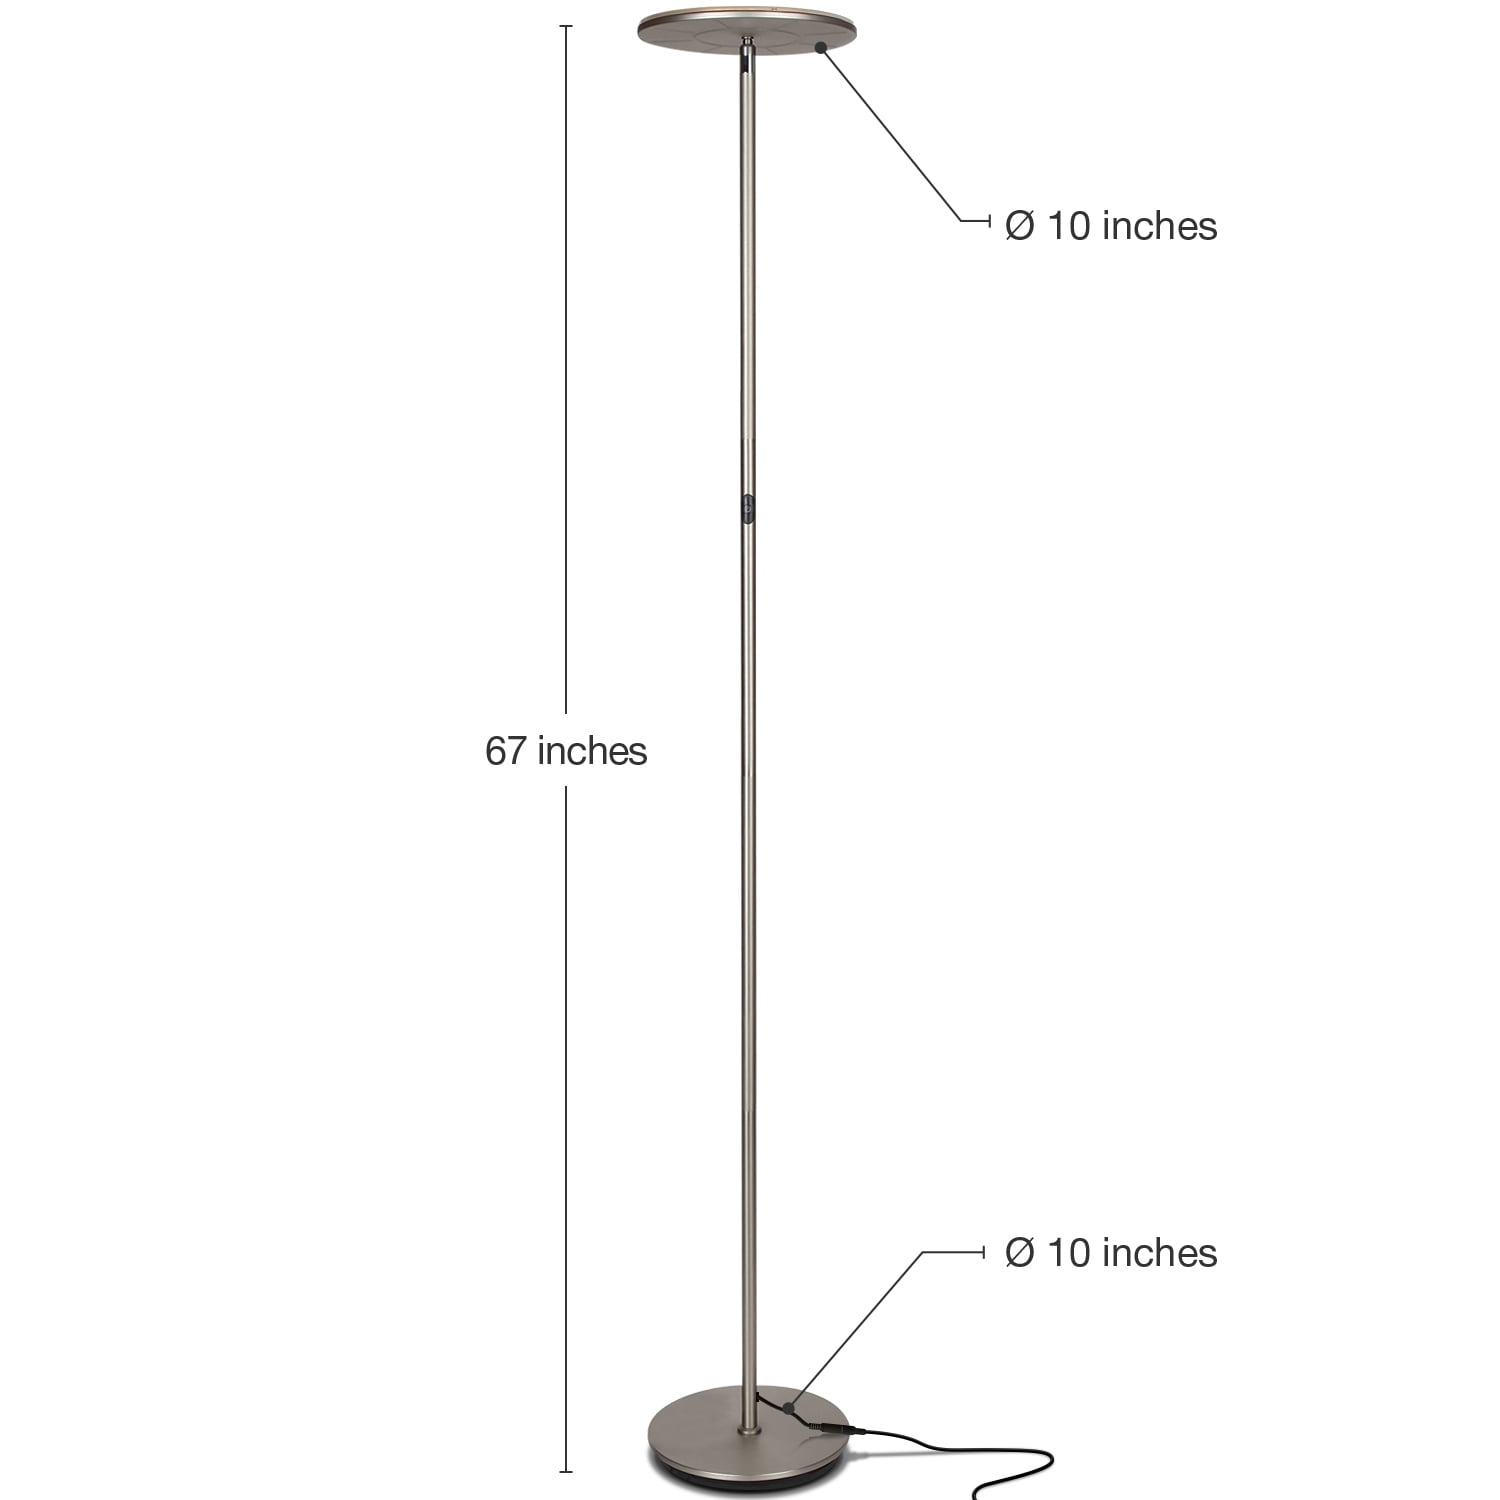 Brightech Brand Sky 30 Flux LED Torchiere Floor Lamp in Nickel Color 